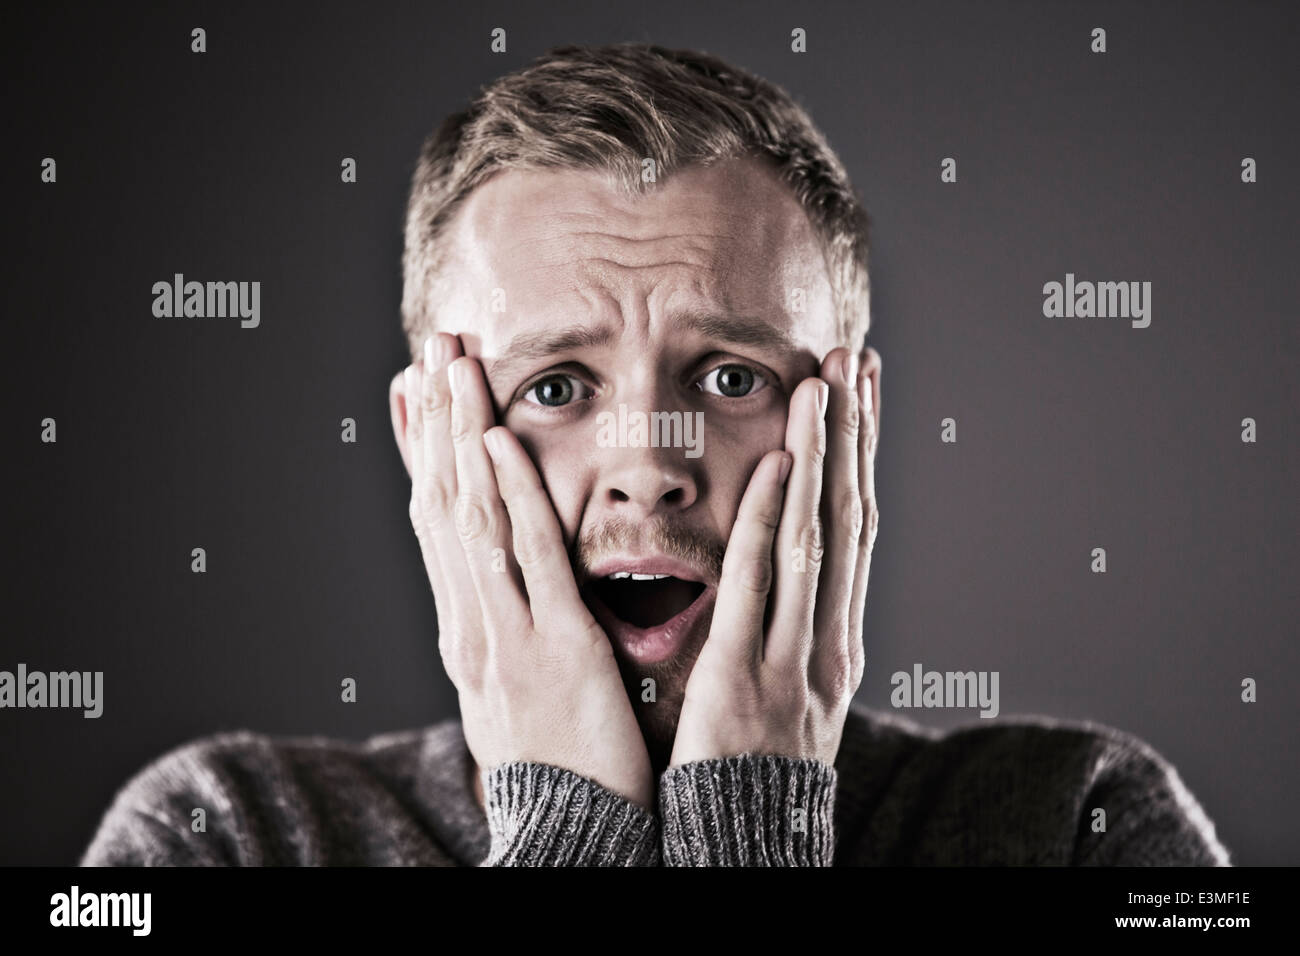 Portrait of surprised man with head in hands Stock Photo